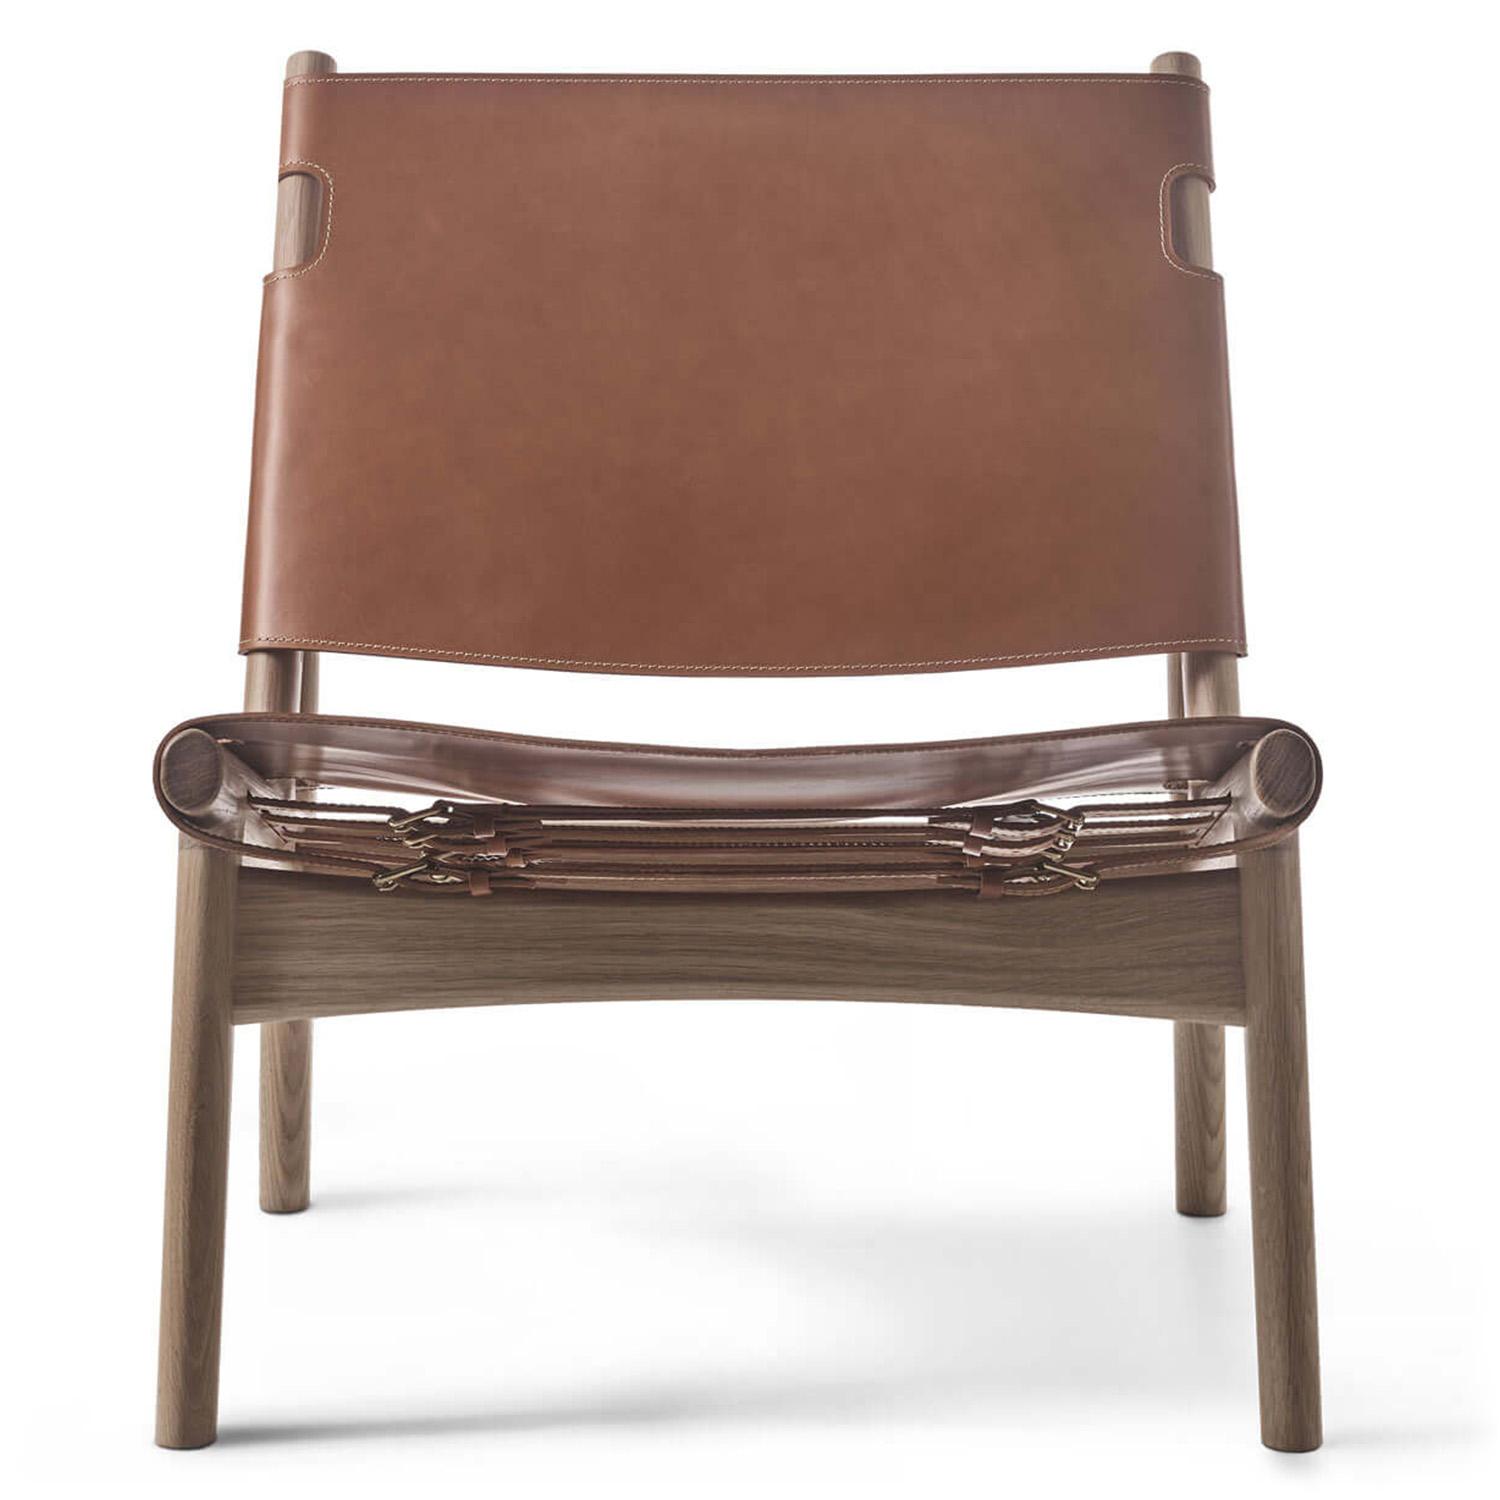 Leather Belt Lounge Chair